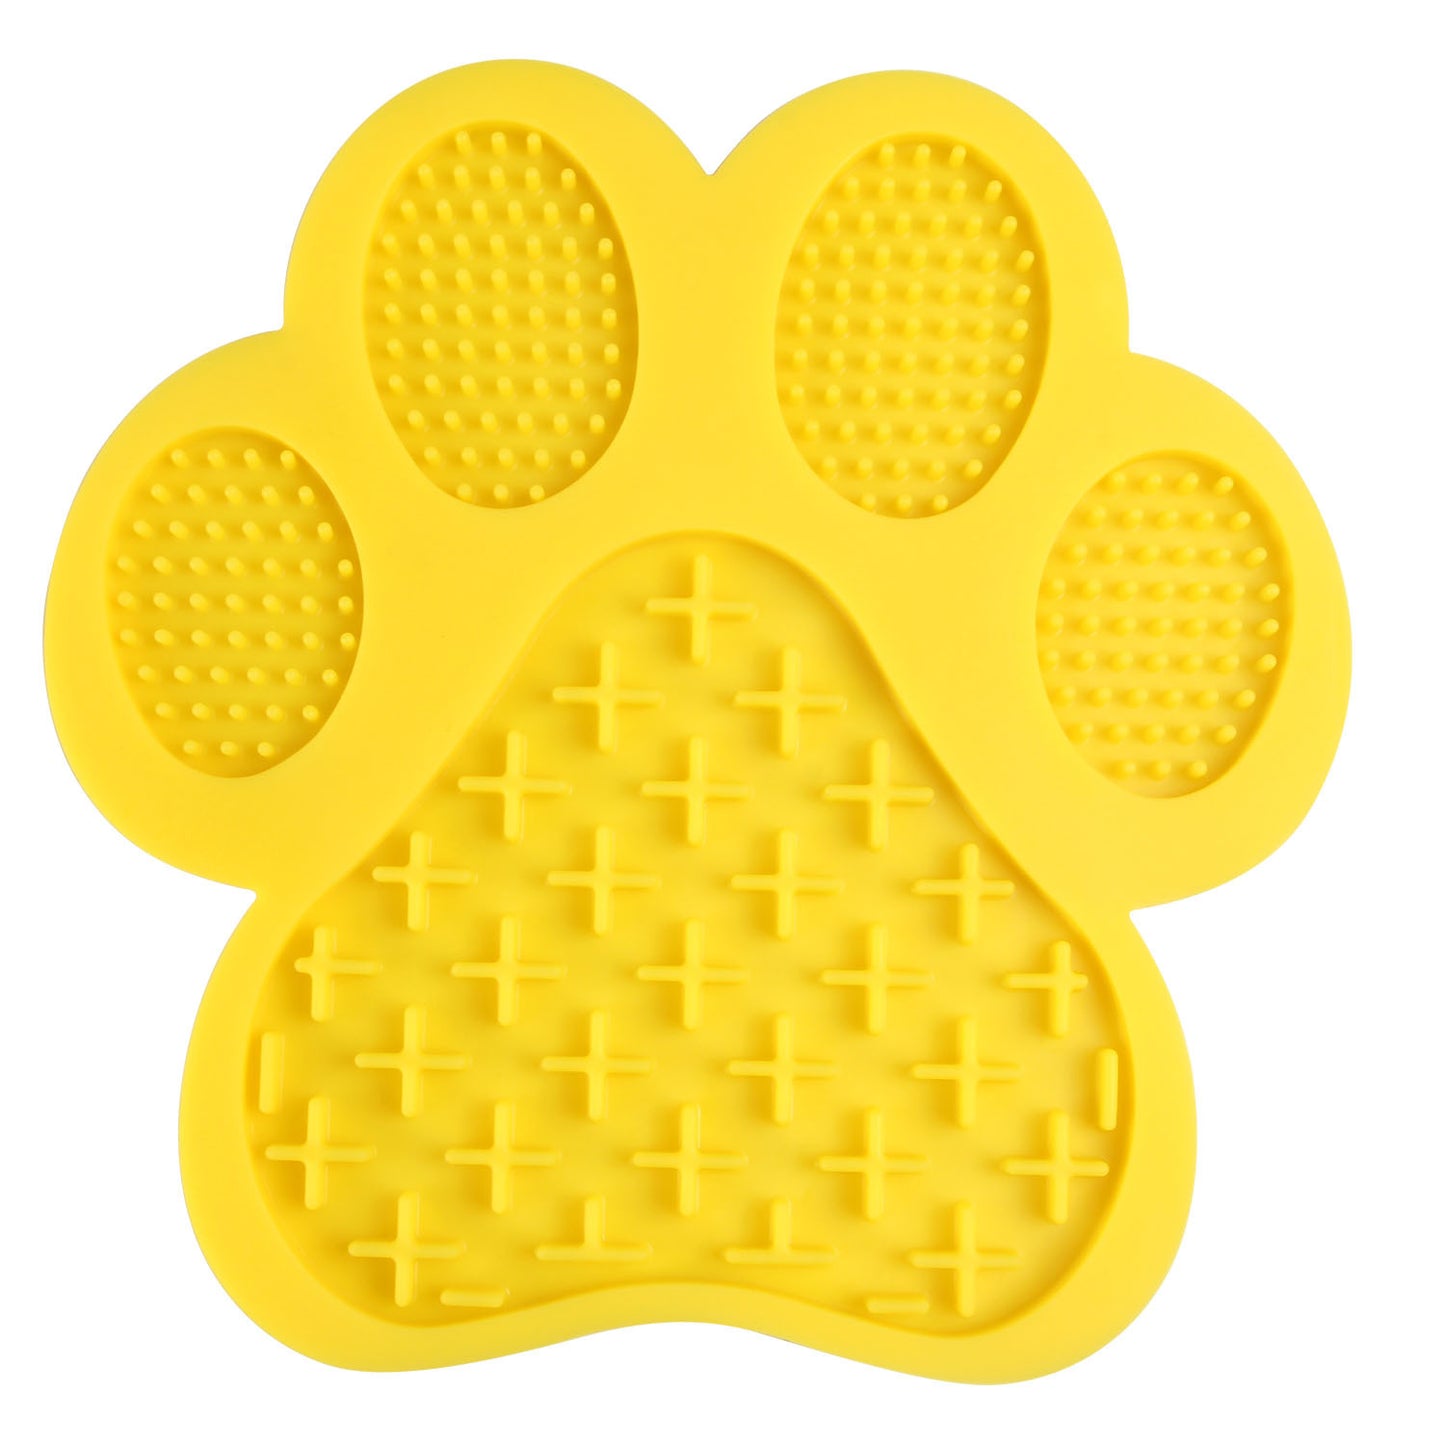 Slow Feeder Lick Mat for Dogs